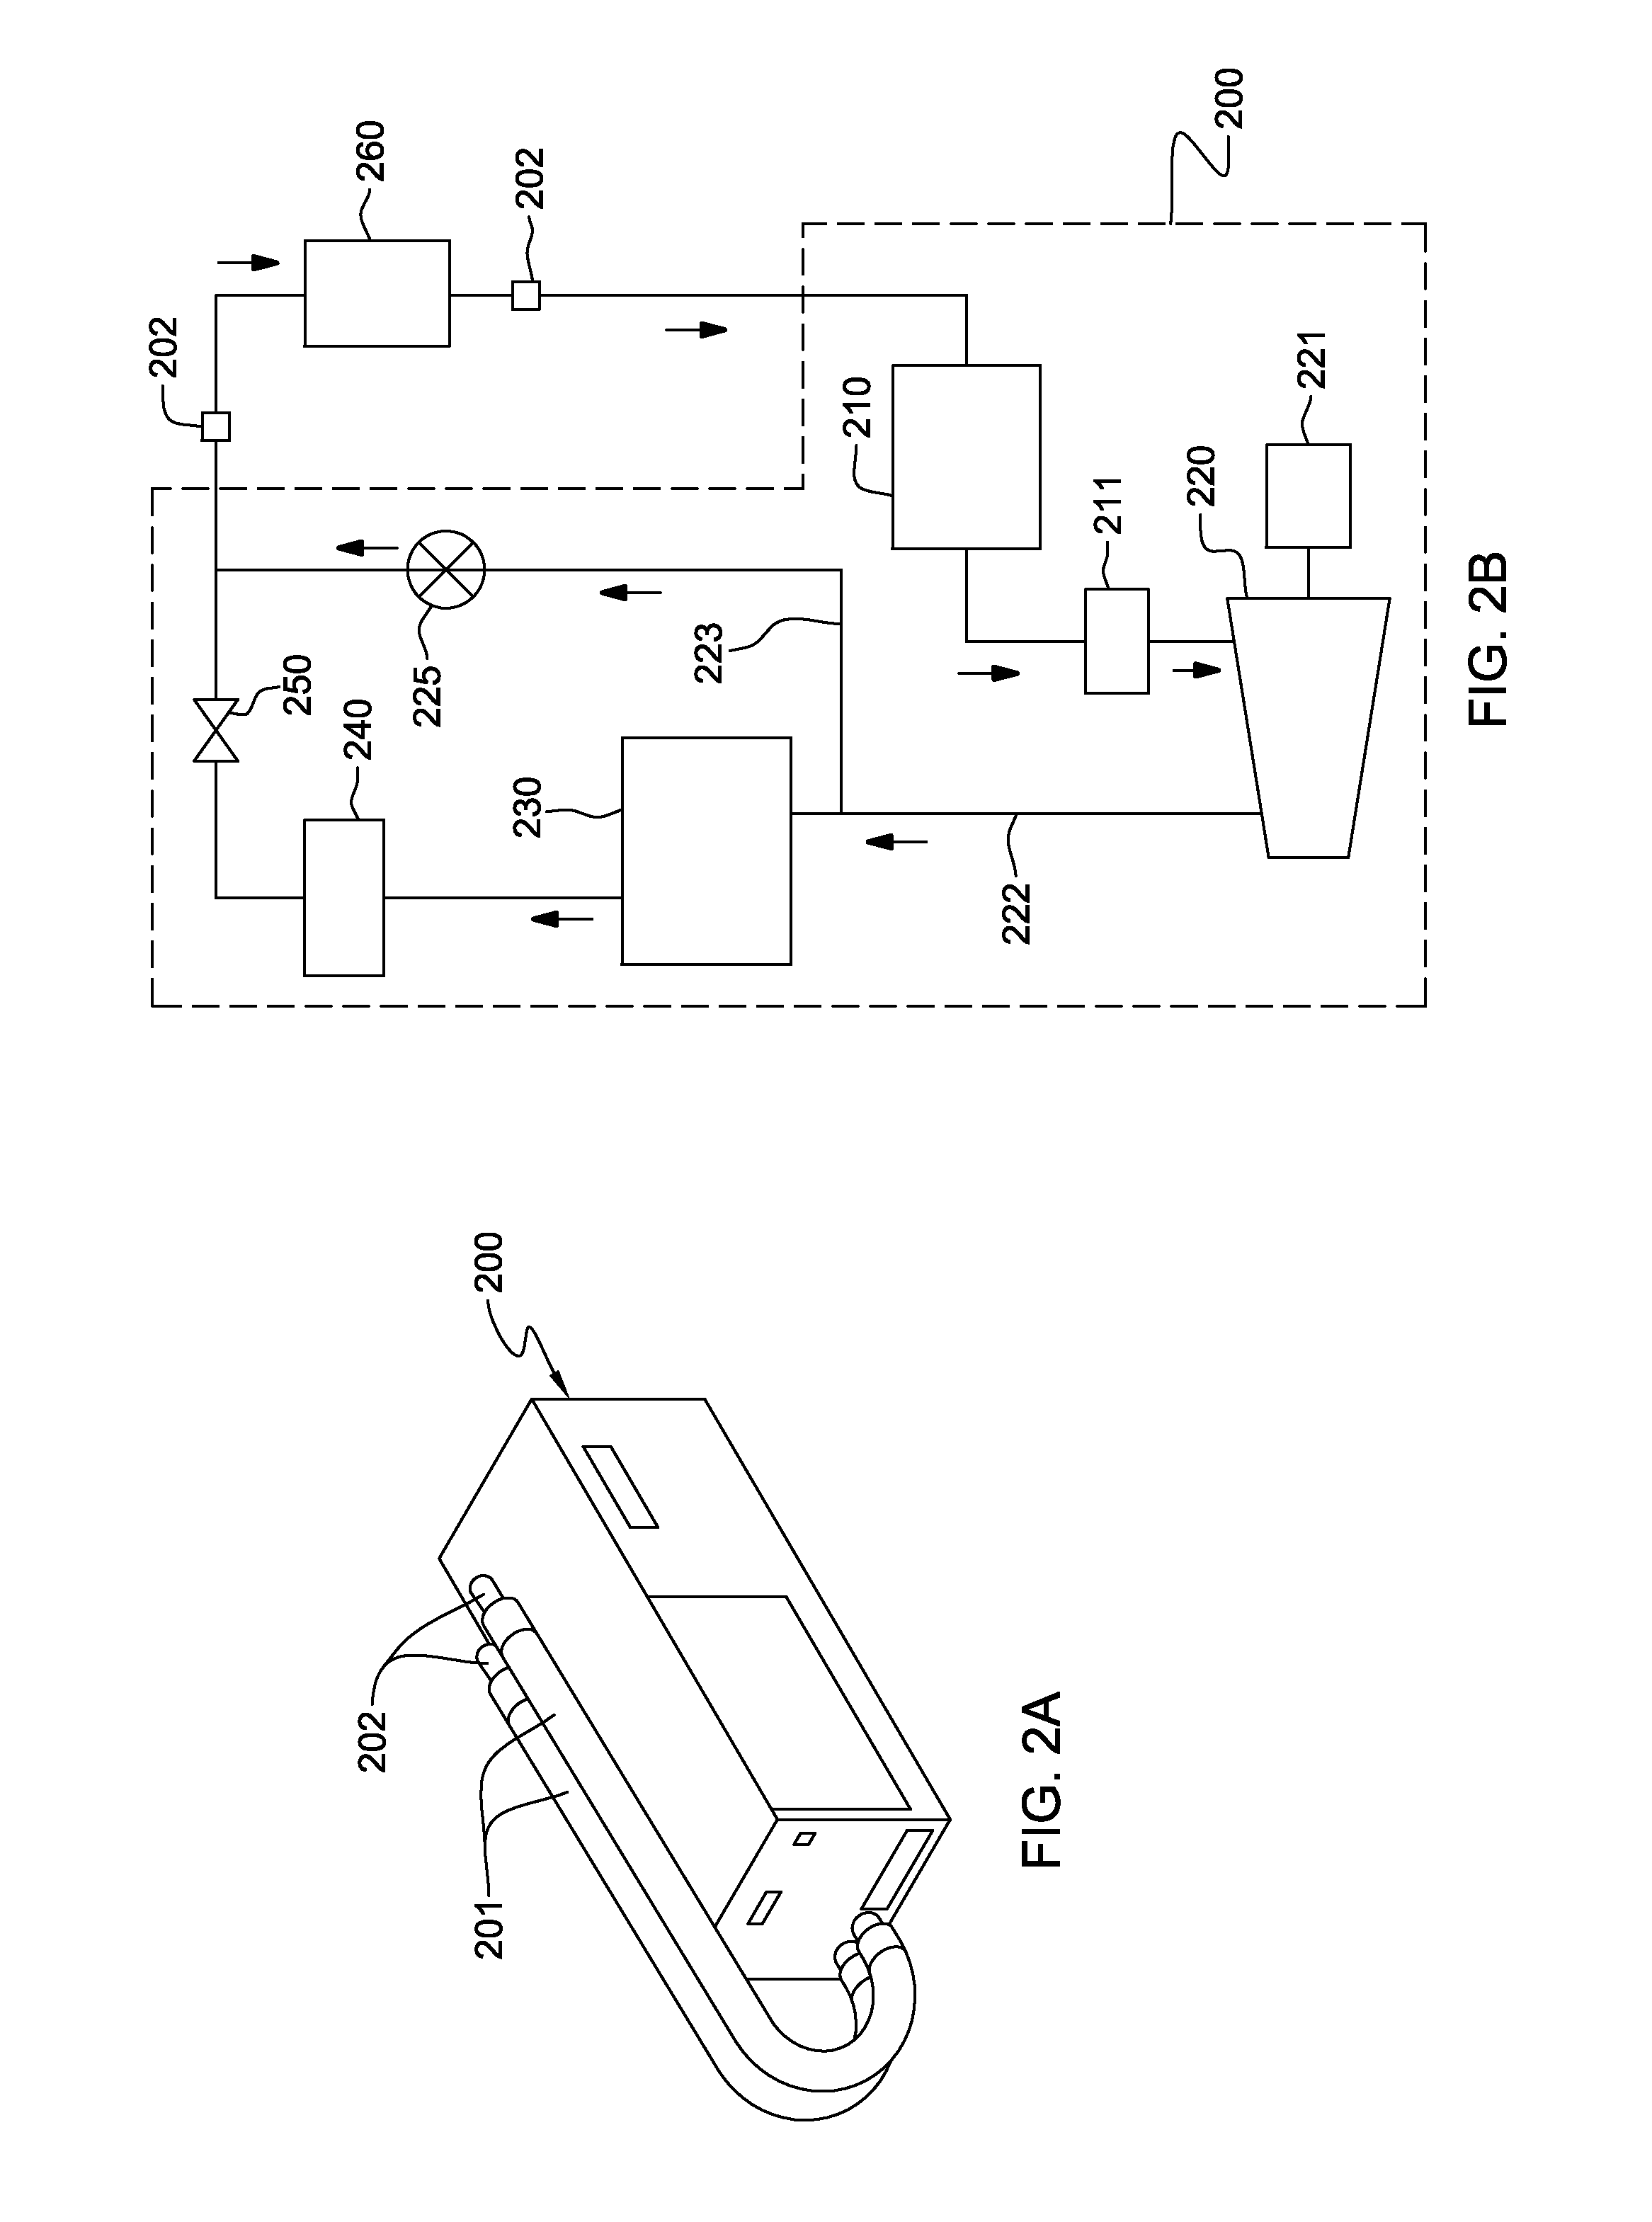 Coolant-buffered, vapor-compression refrigeration with thermal storage and compressor cycling